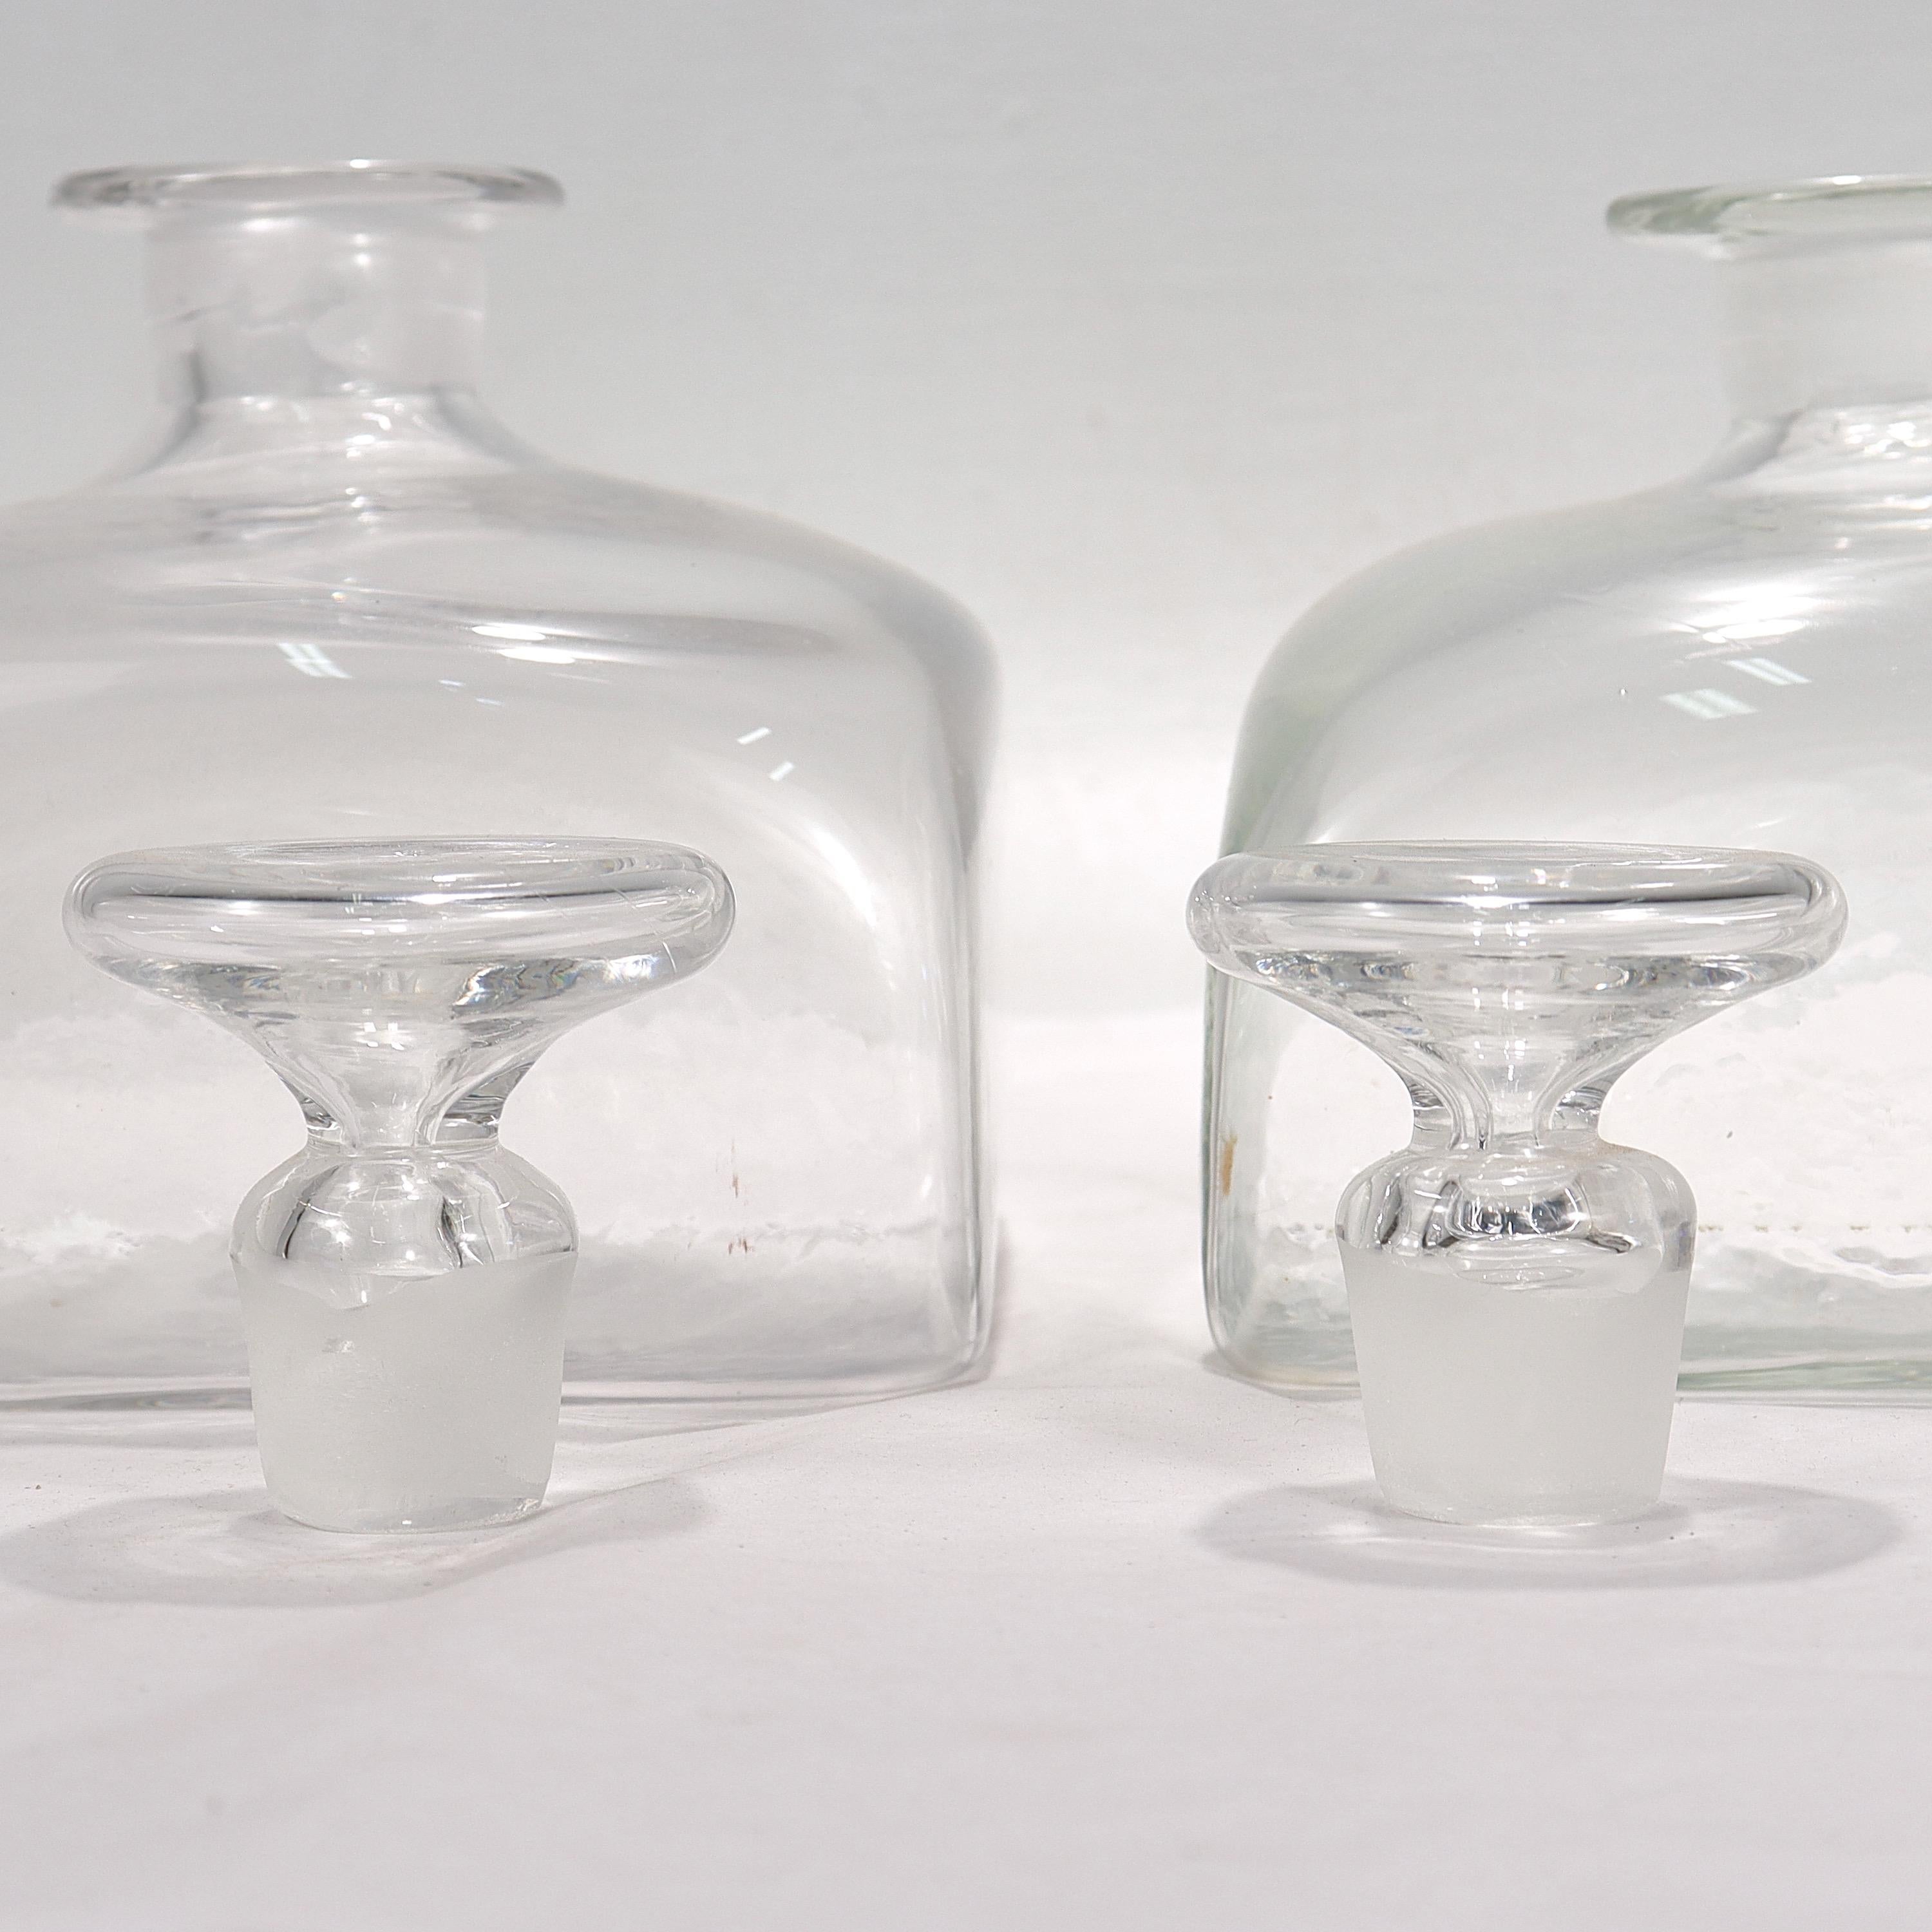 Pair of Antique Nautical or Maritime Blown Glass Ship Decanters For Sale 3